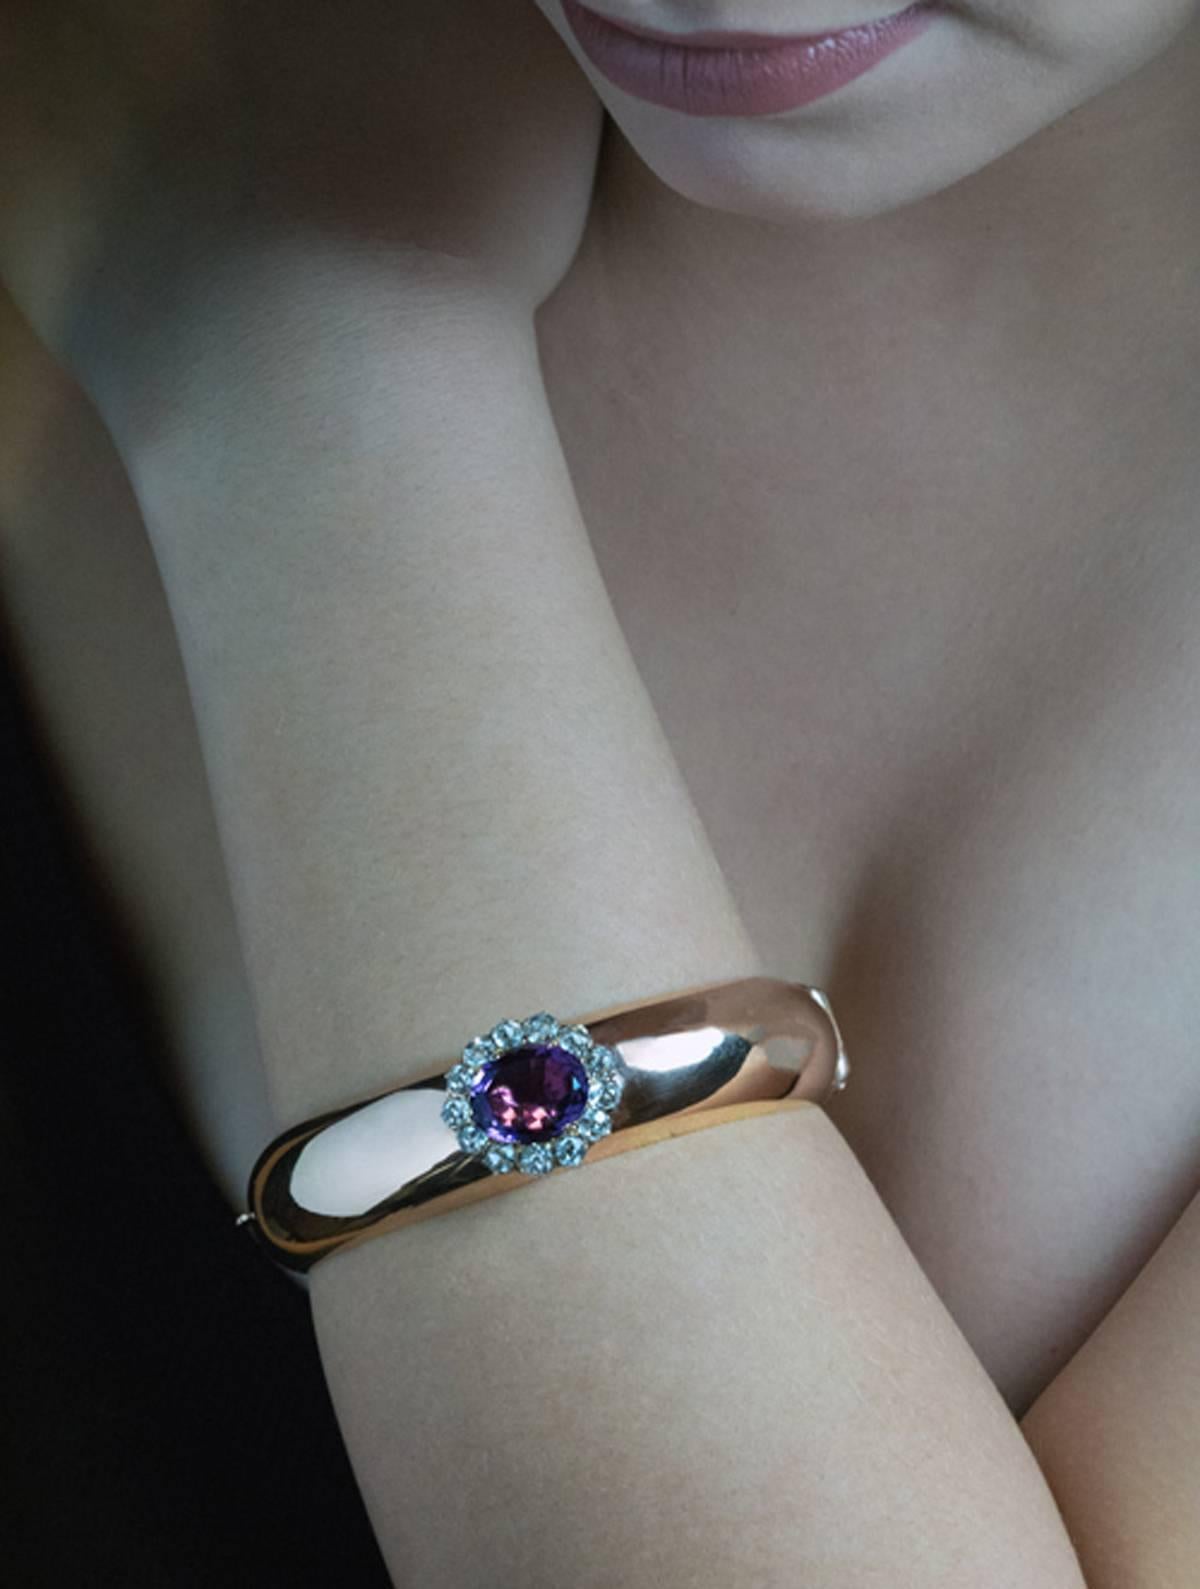 Made in Odessa between 1908 and 1917

This chunky highly polished rose gold bangle bracelet is centered with a plum purple amethyst (approximately 8.60 ct) surrounded by faceted aquamarines.

The bracelet is marked on clasp with 56 zolotnik Imperial